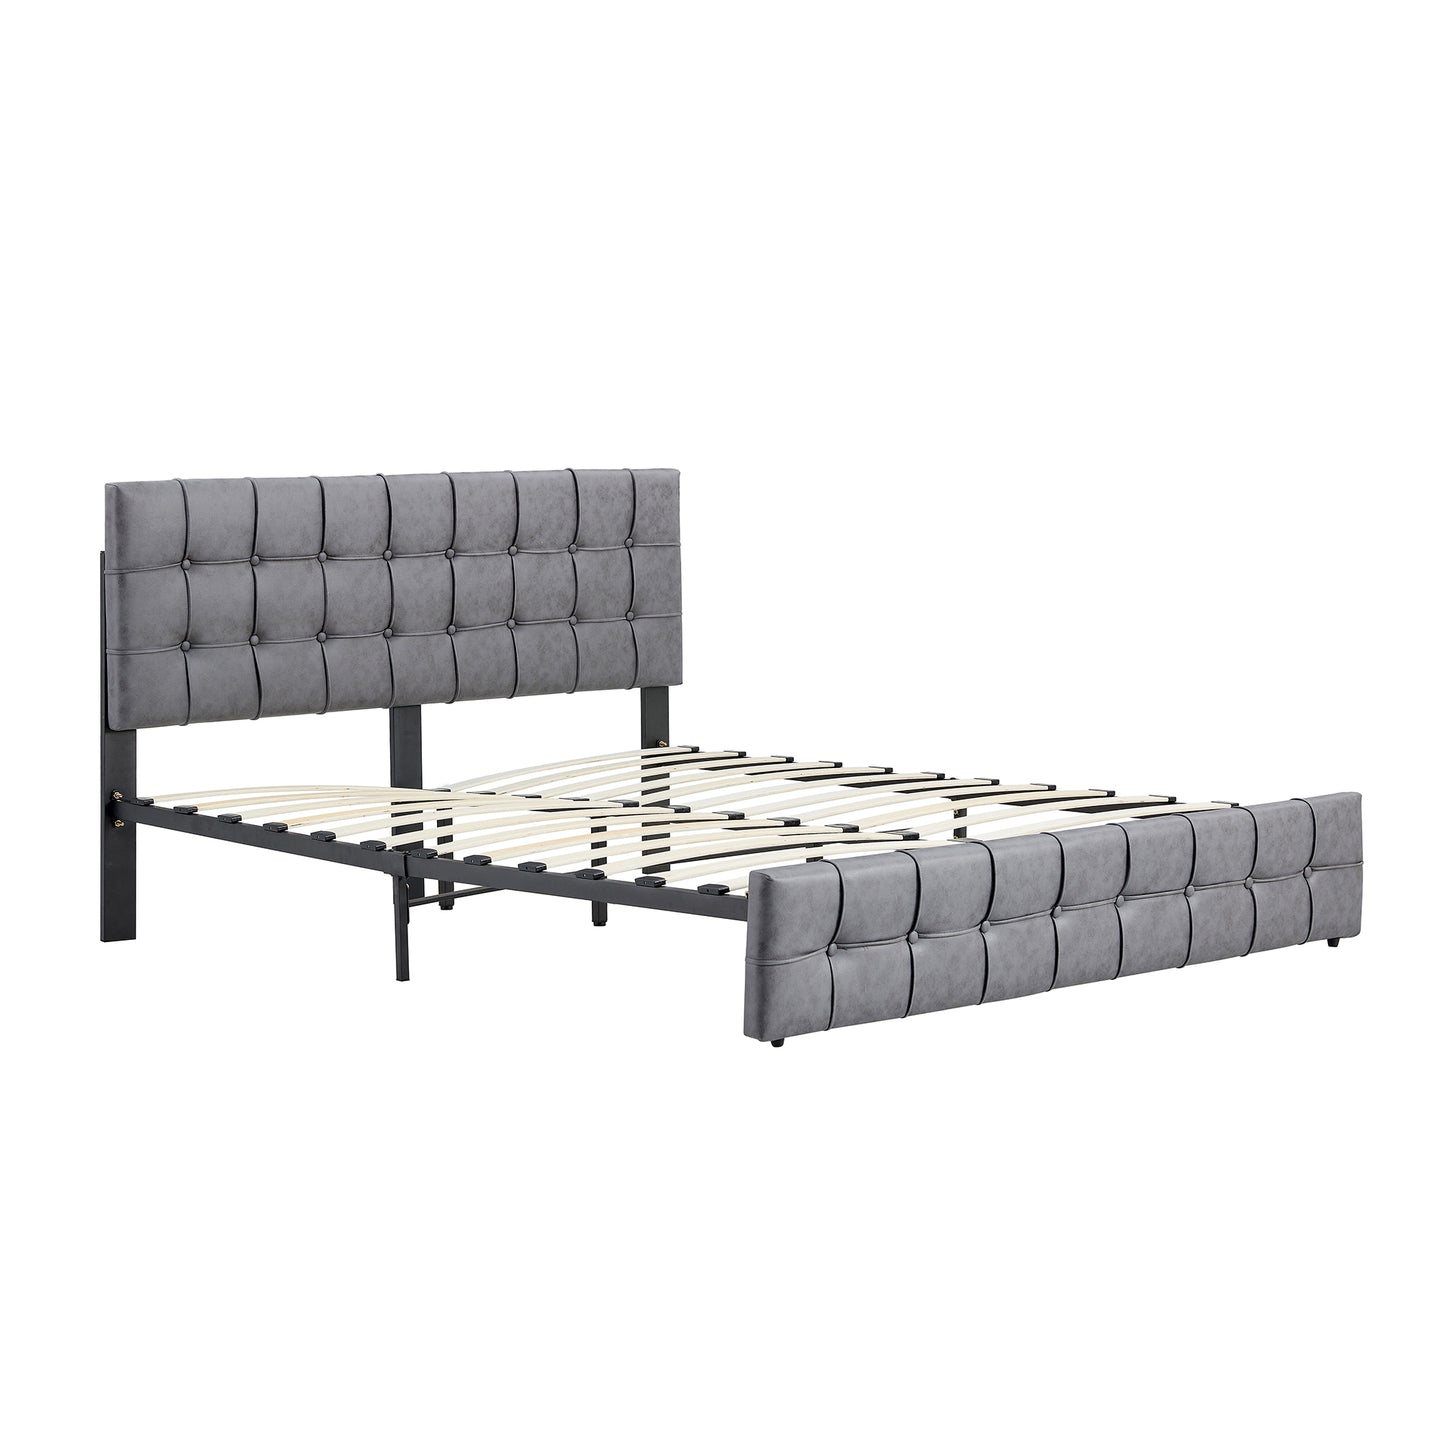 SYNGAR Upholstered Platform Bed Frame King Size with Button Tufted Headboard, Load-Bearing 650LBS, Heavy Duty Wood Mattress Foundation with Strong Slat Support for Kids Teens Adults, Gray